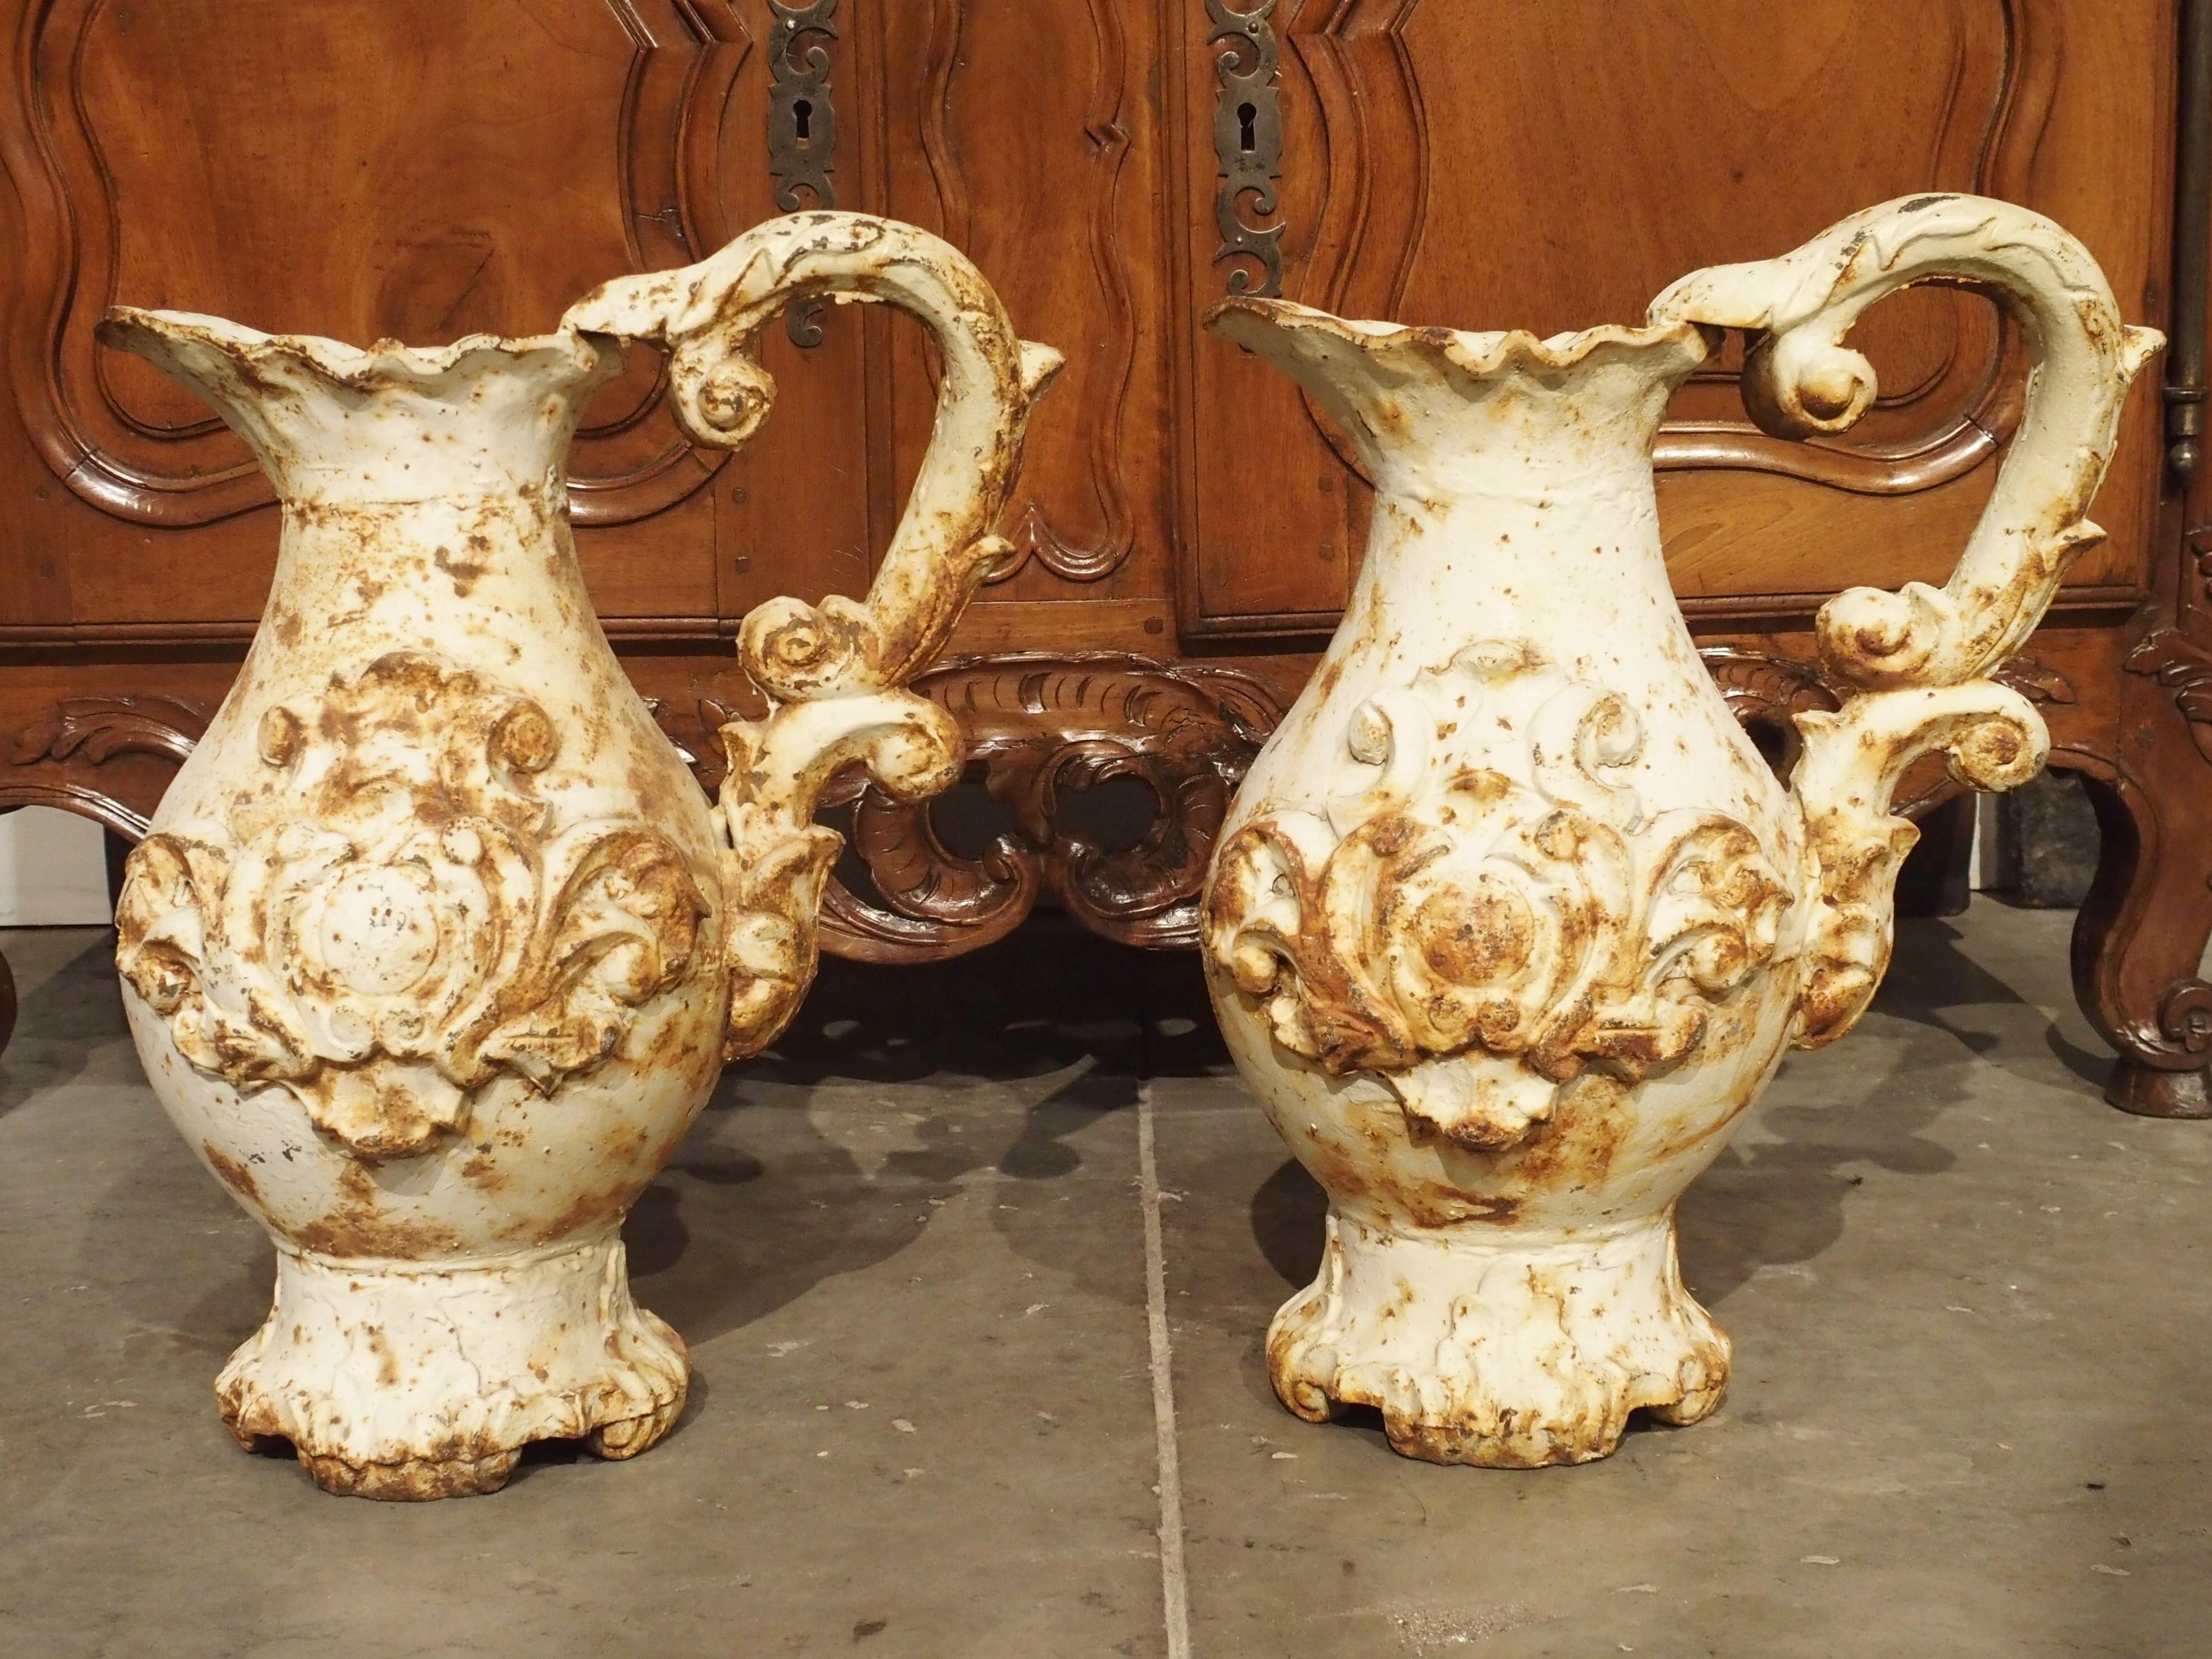 This pair of large antique French parcel paint pitchers has very ornate designs. In the Rococo style, their motifs are drawn from nature. Their scalloped upper rim imitates the shell motif and their handles are acanthus leaf C-scrolls. The shaped